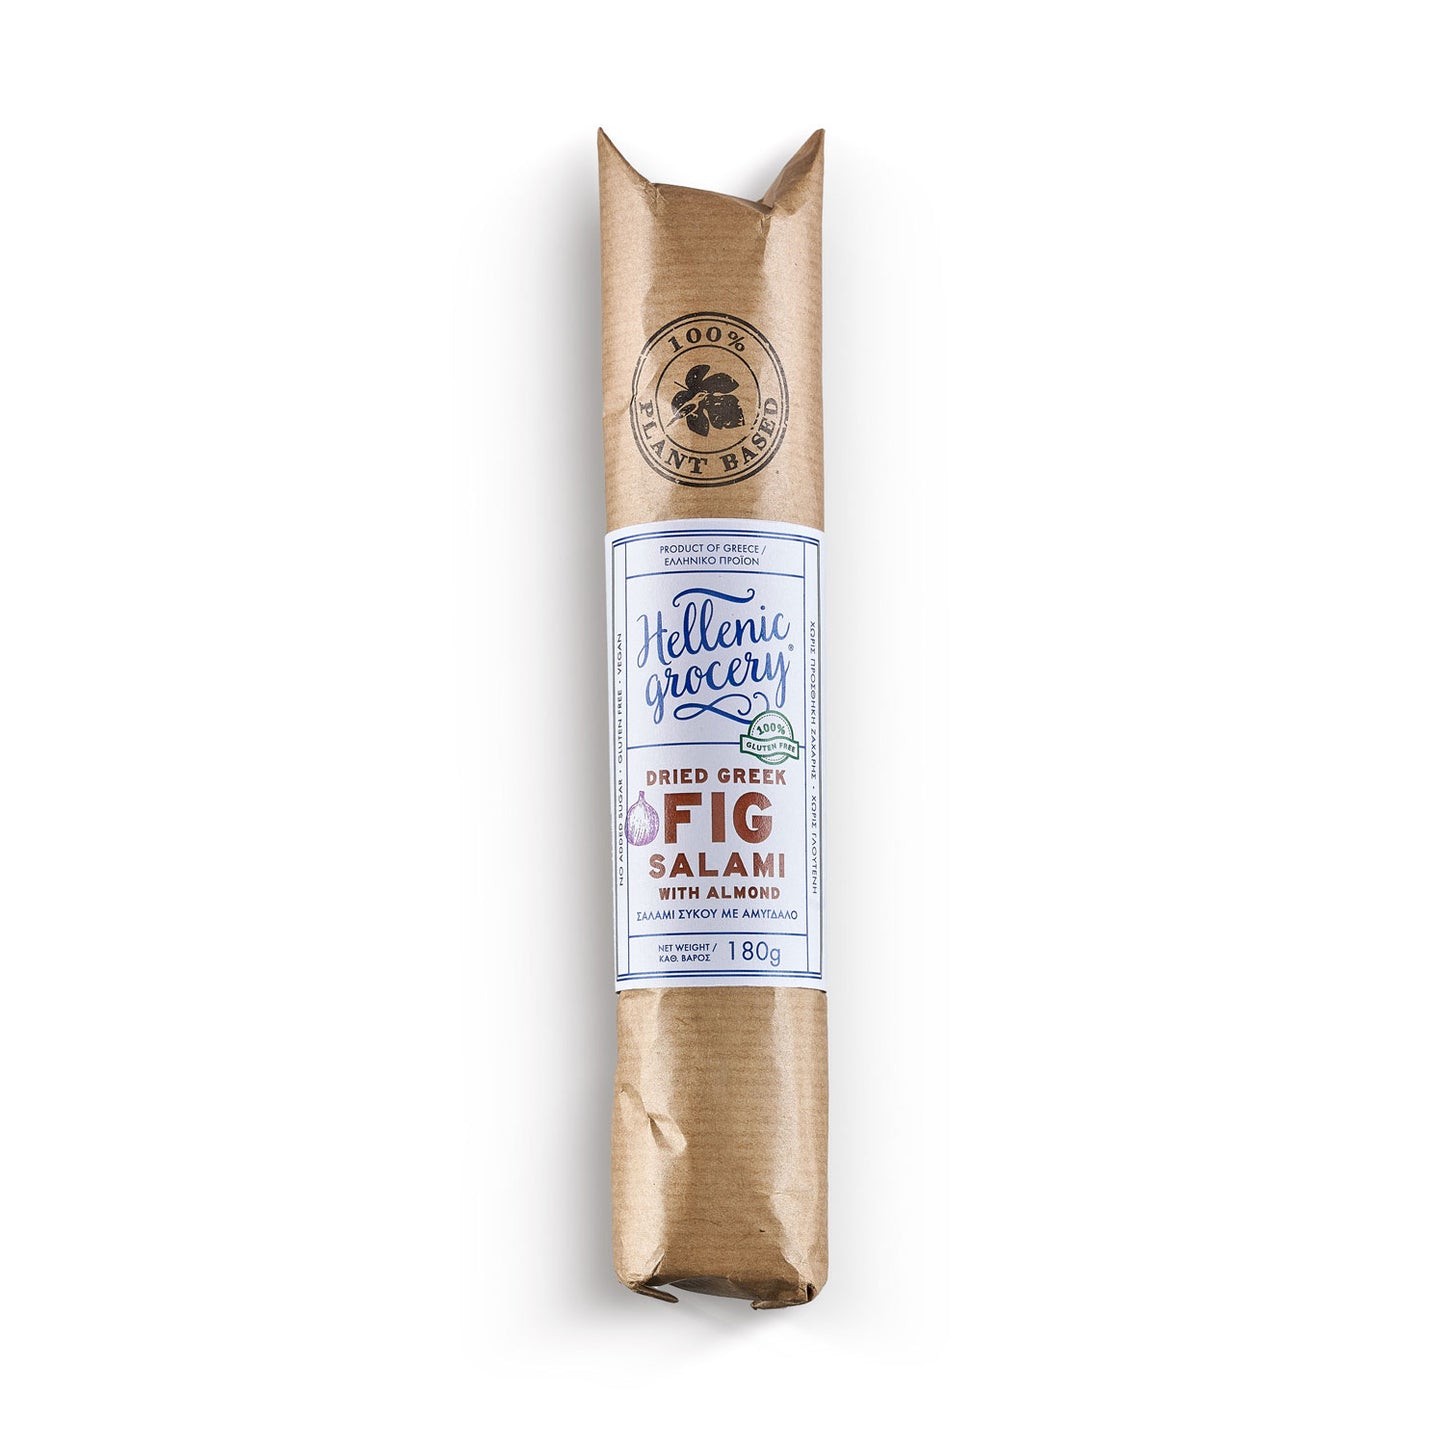 Dried Fig Salami with Almond - 180g - Hellenic Grocery